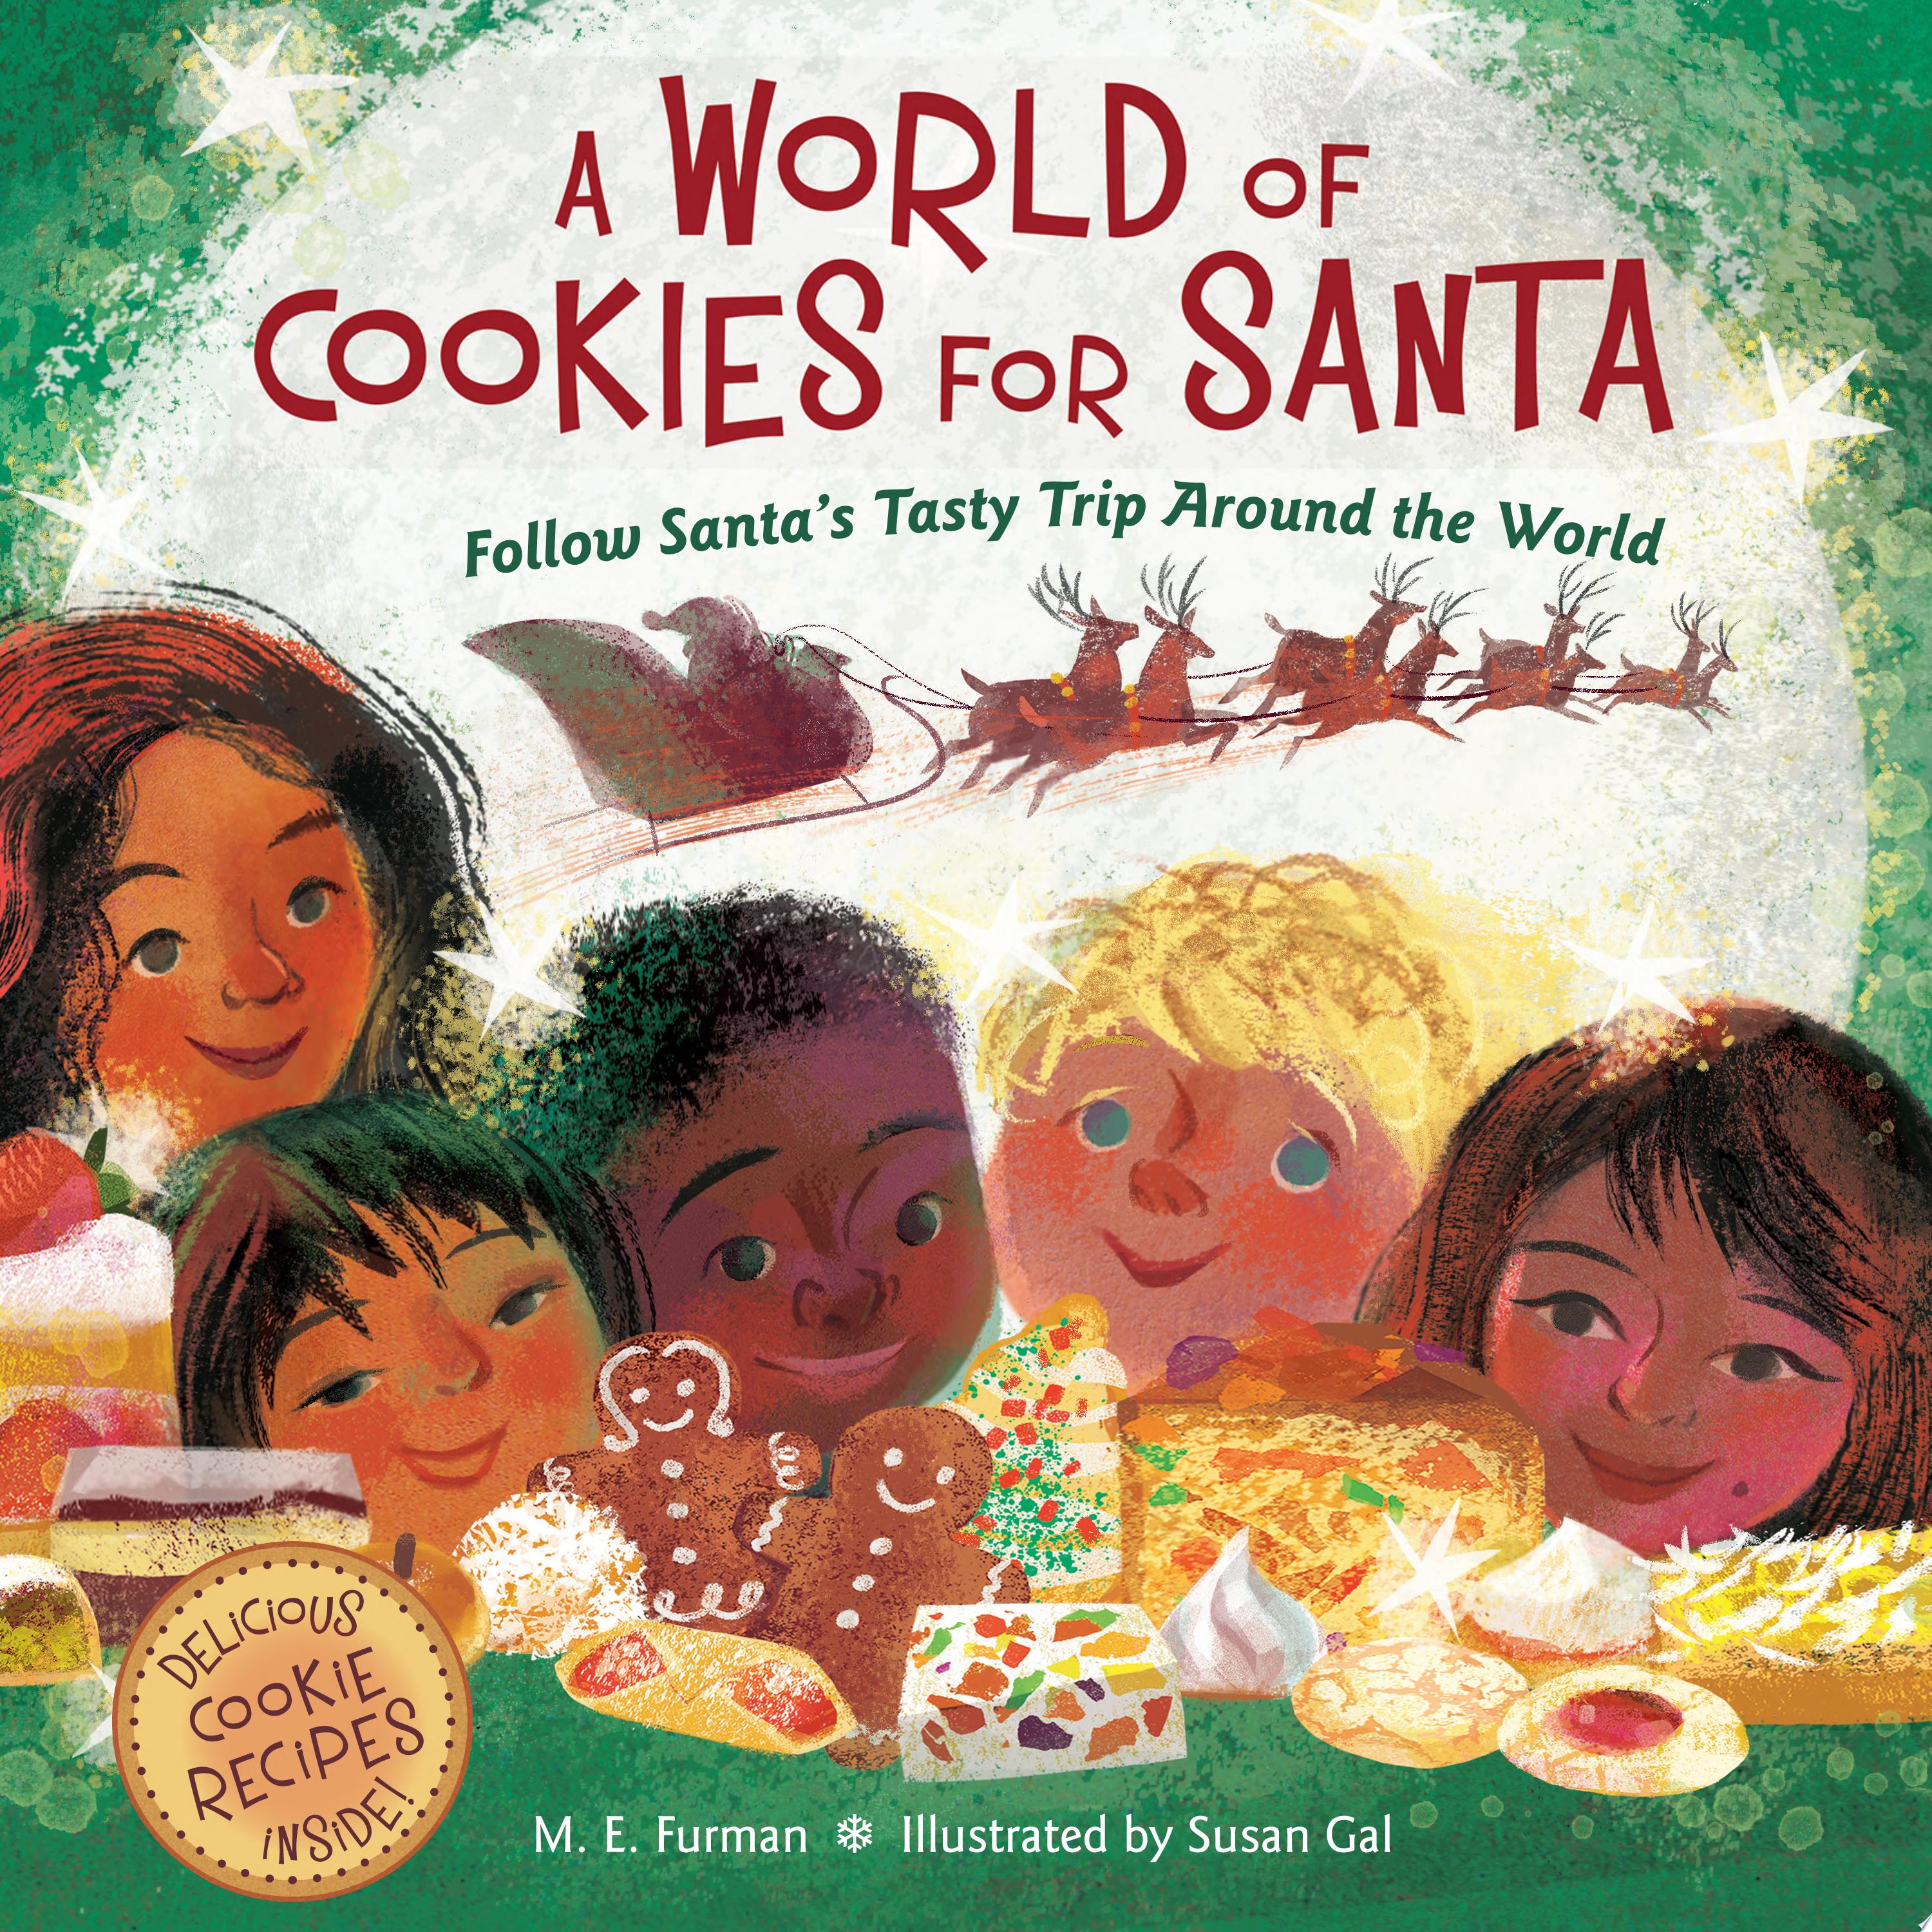 Image for "A World of Cookies for Santa"